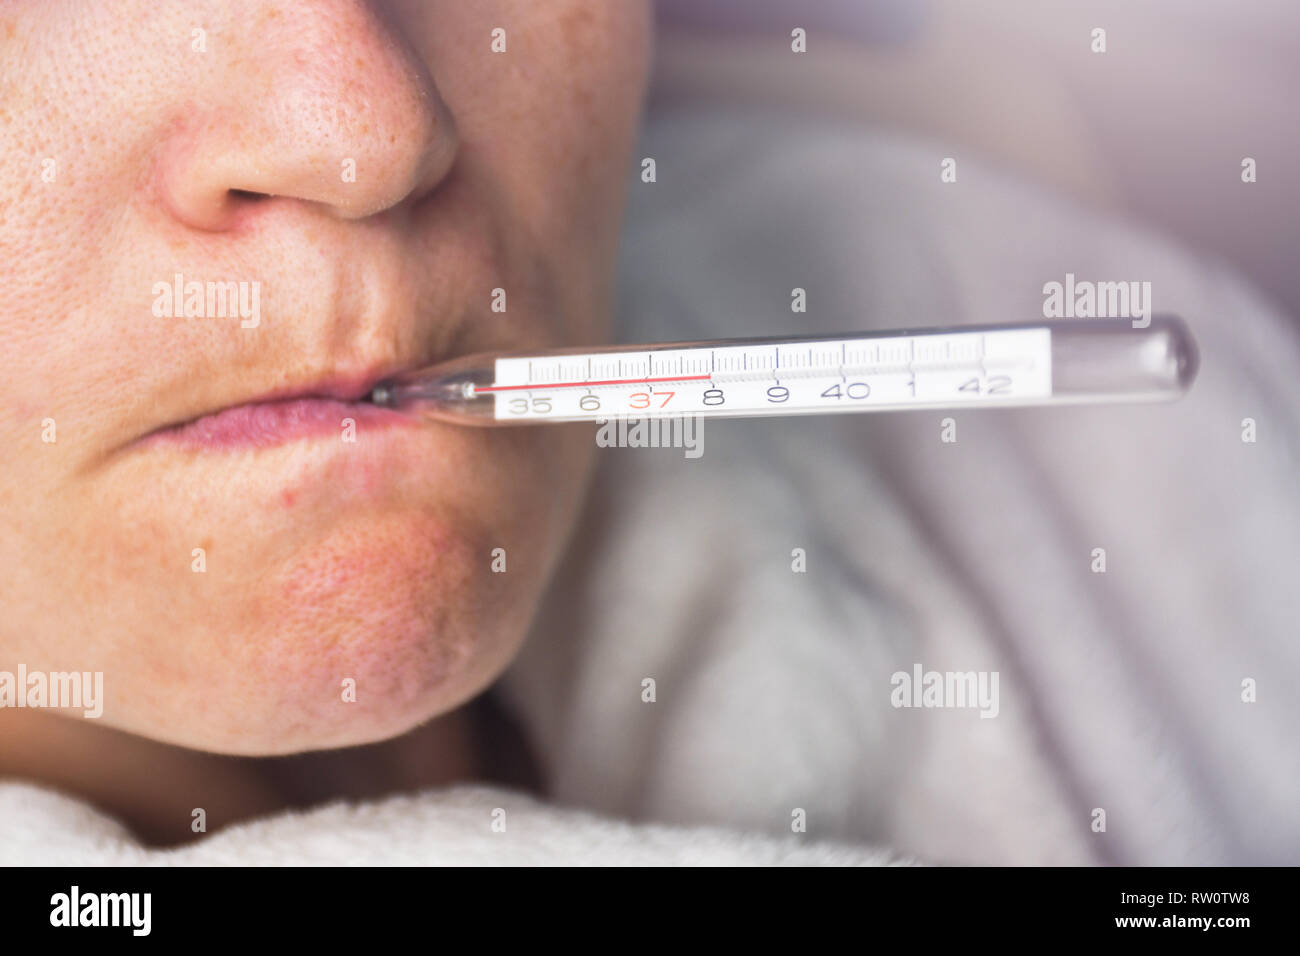 Sick woman with seasonal flu measuring body temperature with thermometer in her mouth reaching 38 degrees celsius Stock Photo